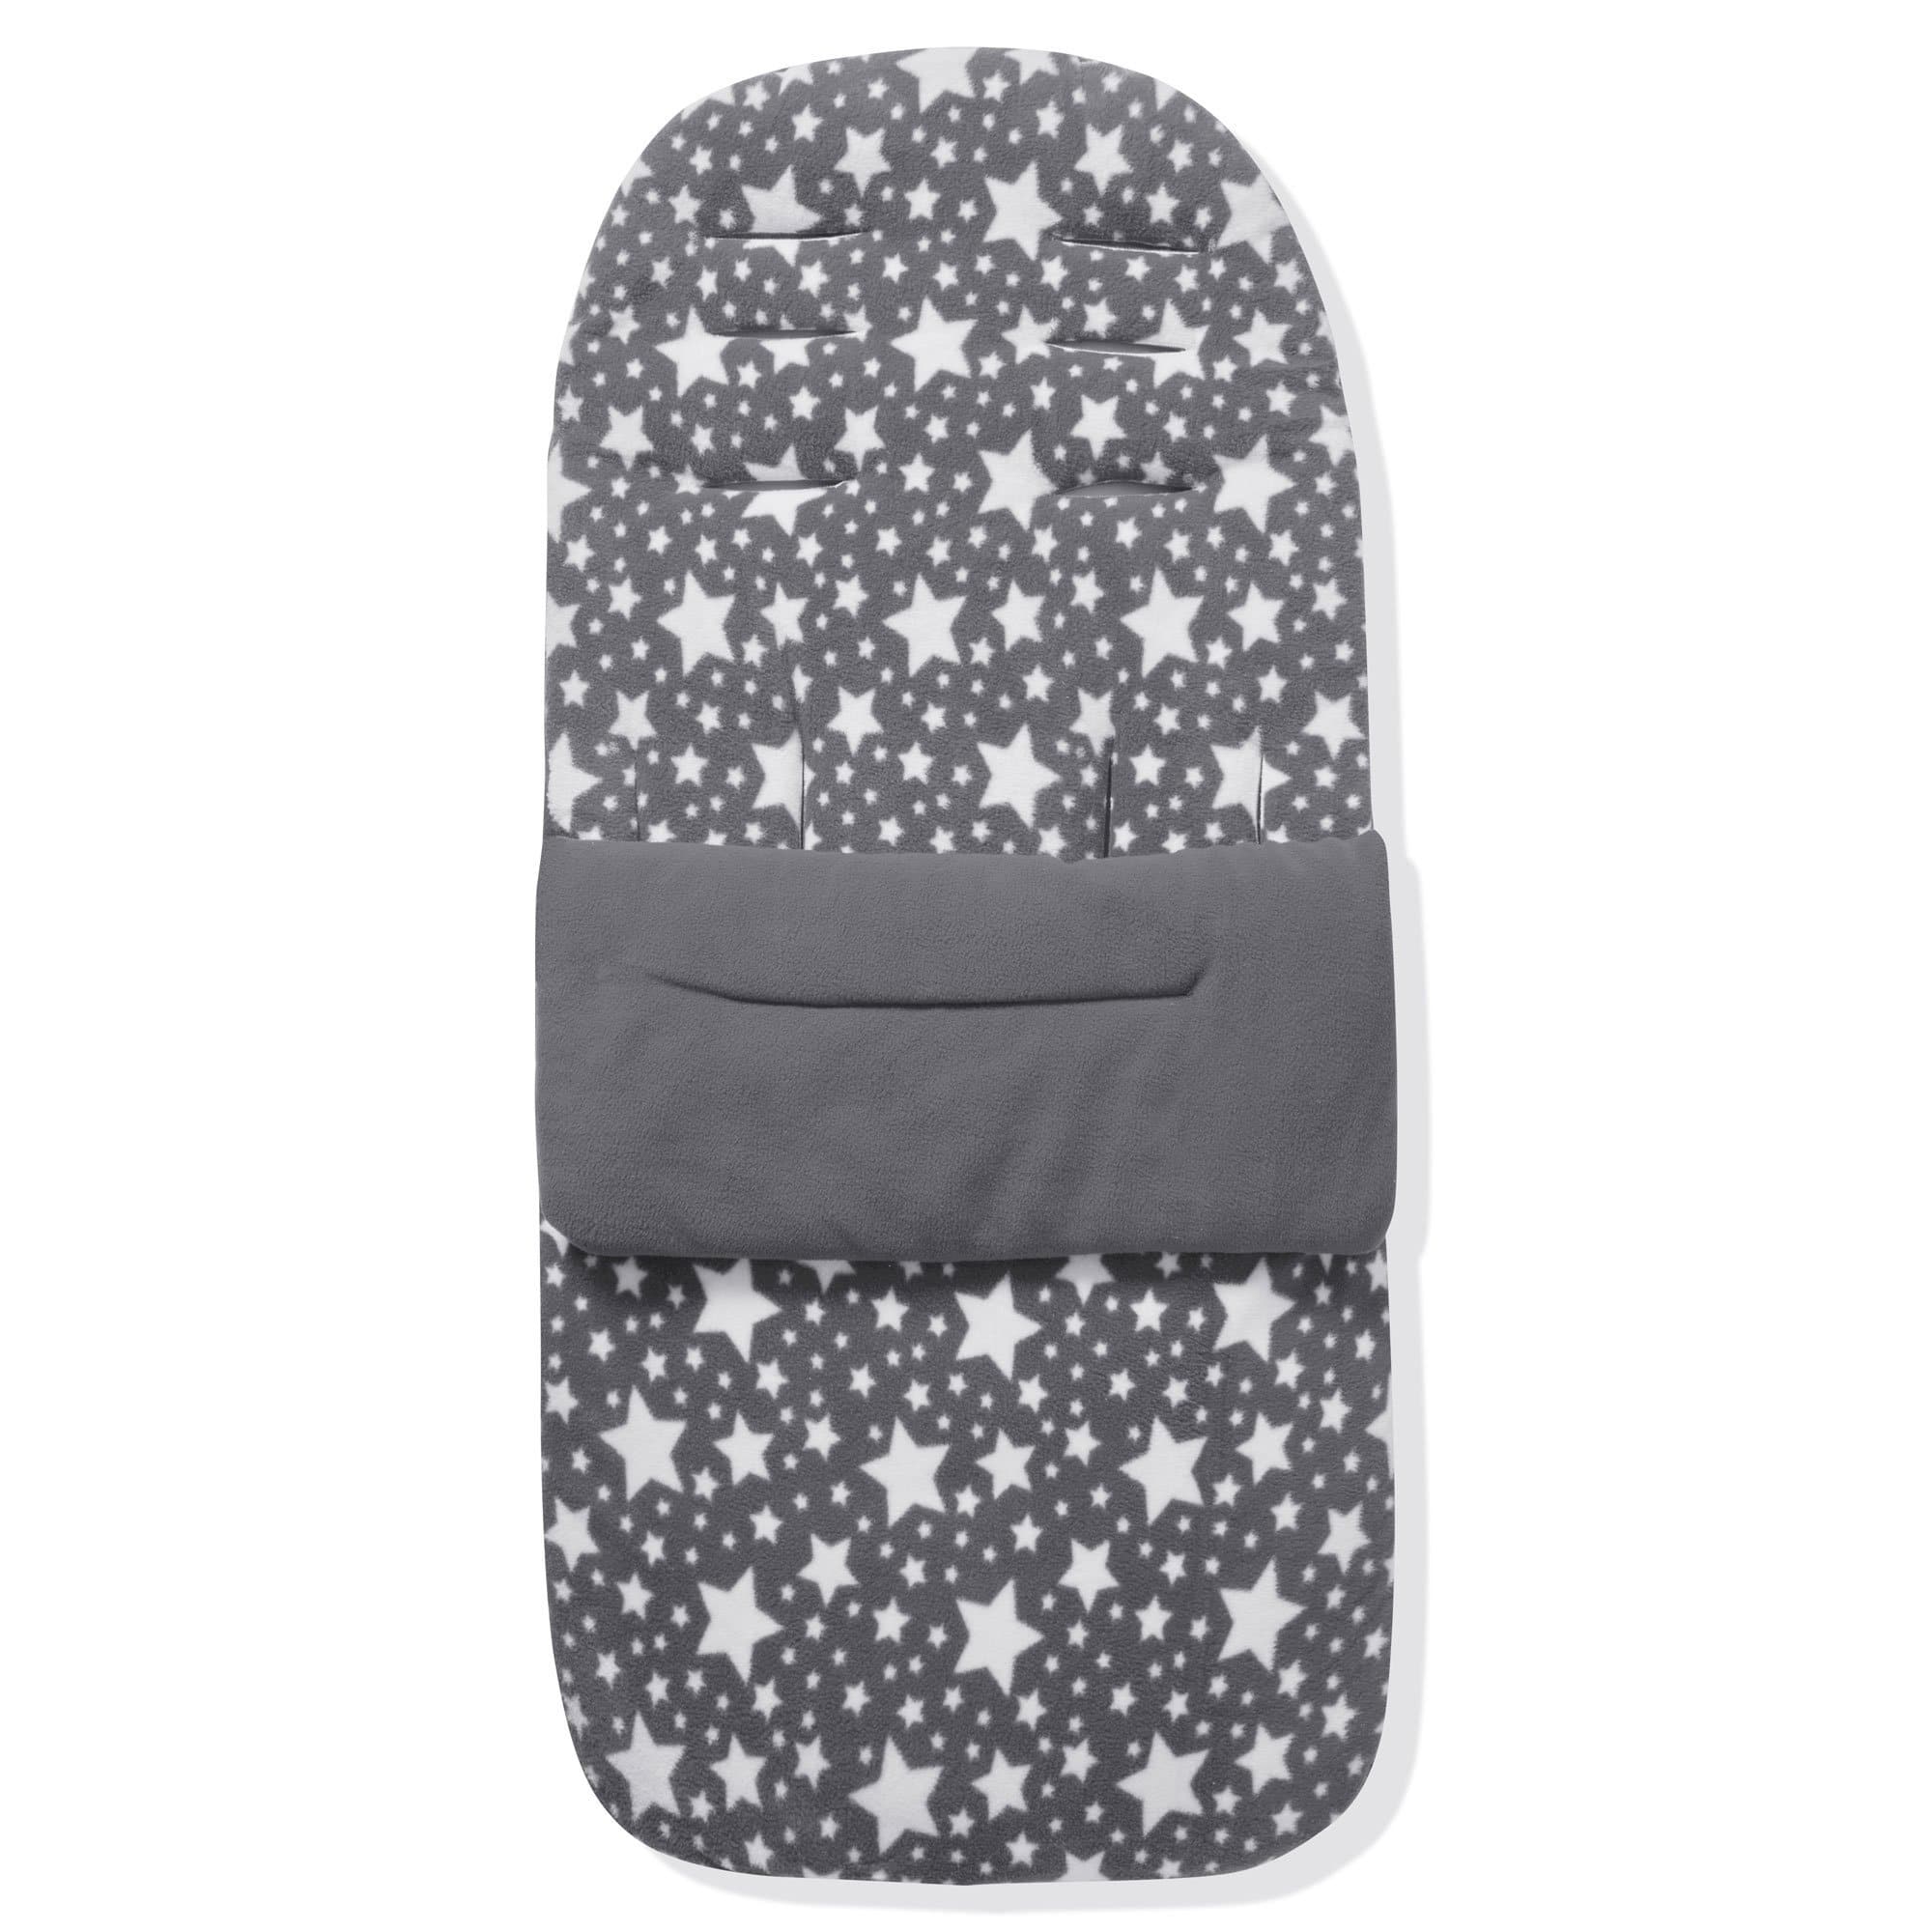 Fleece Footmuff / Cosy Toes Compatible with Teutonia - Grey Star / Fits All Models | For Your Little One